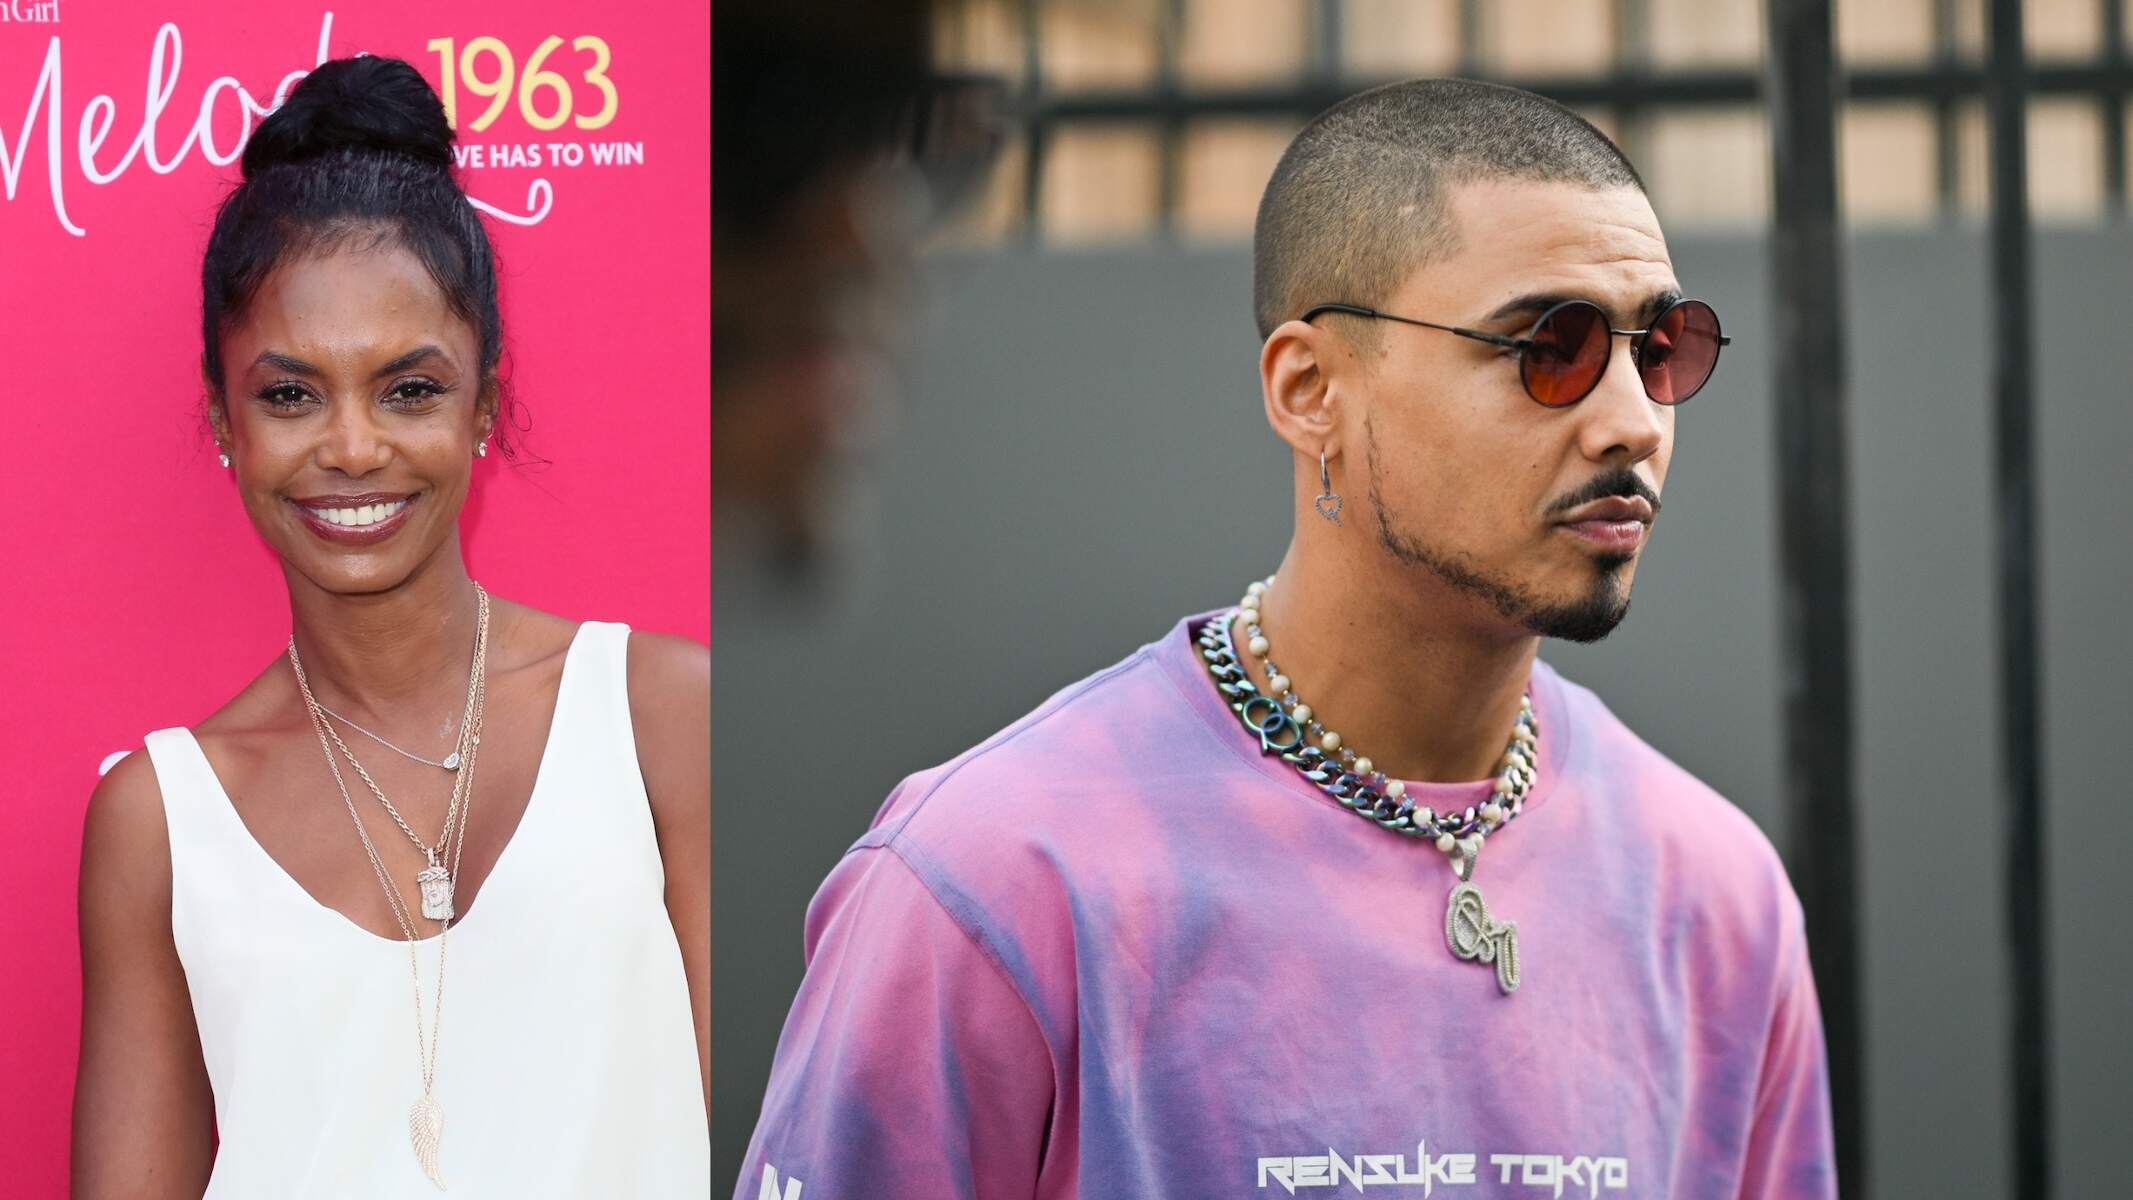 A photo of Kim Porter in a white top alongside a photo of Quincy Brown in a purple shirt